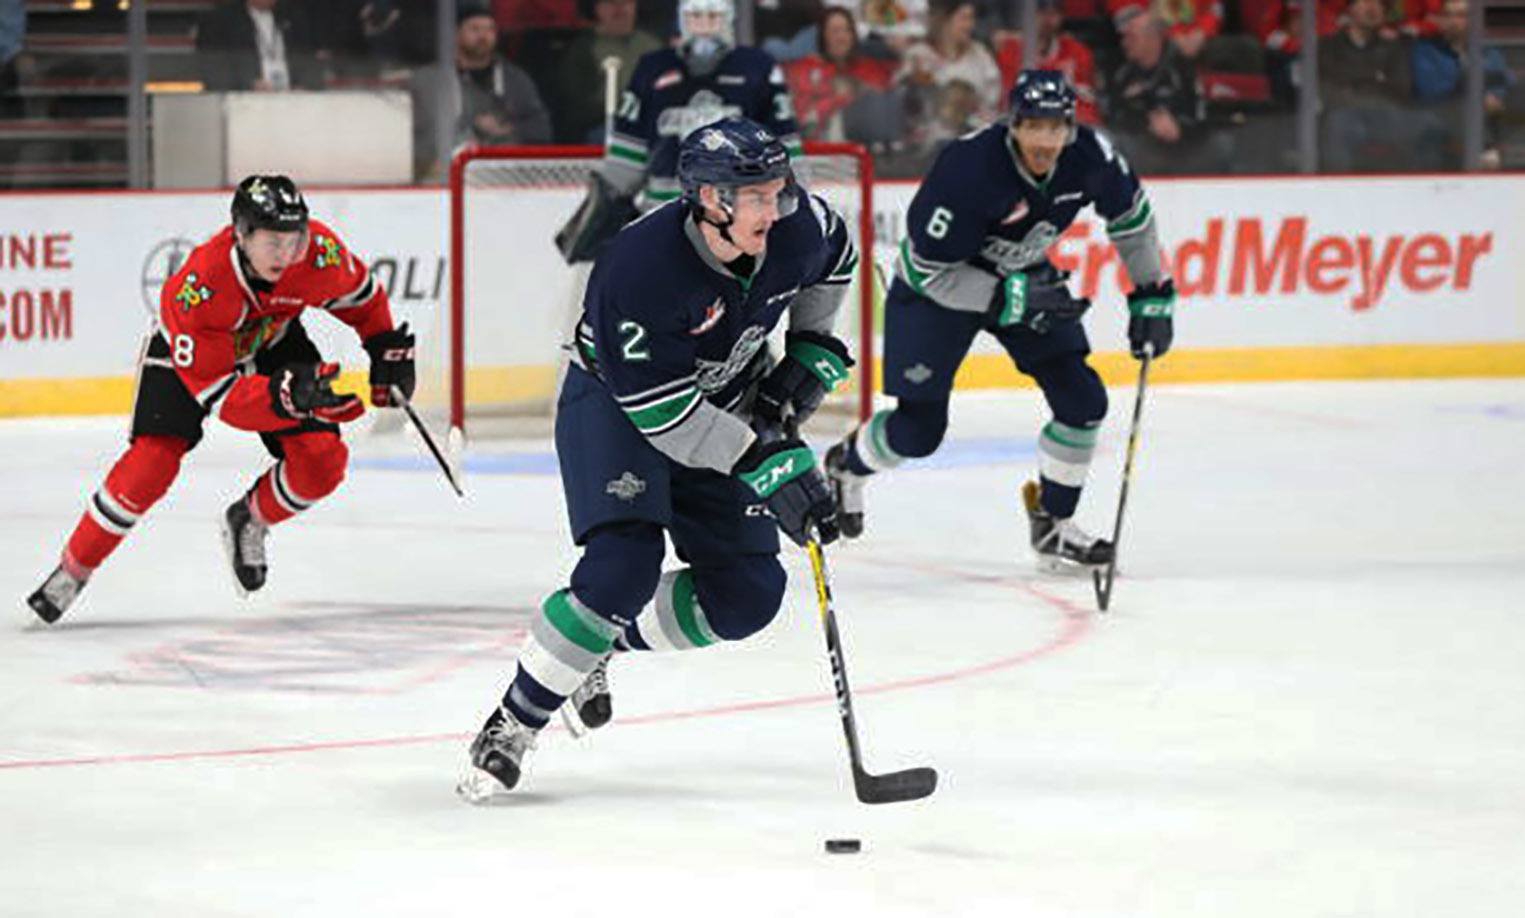 The Thunderbirds’ Austin Strand brings the puck up the ice against the Winterhawks on Saturday night. COURTESY PHOTO, Bryan Heim